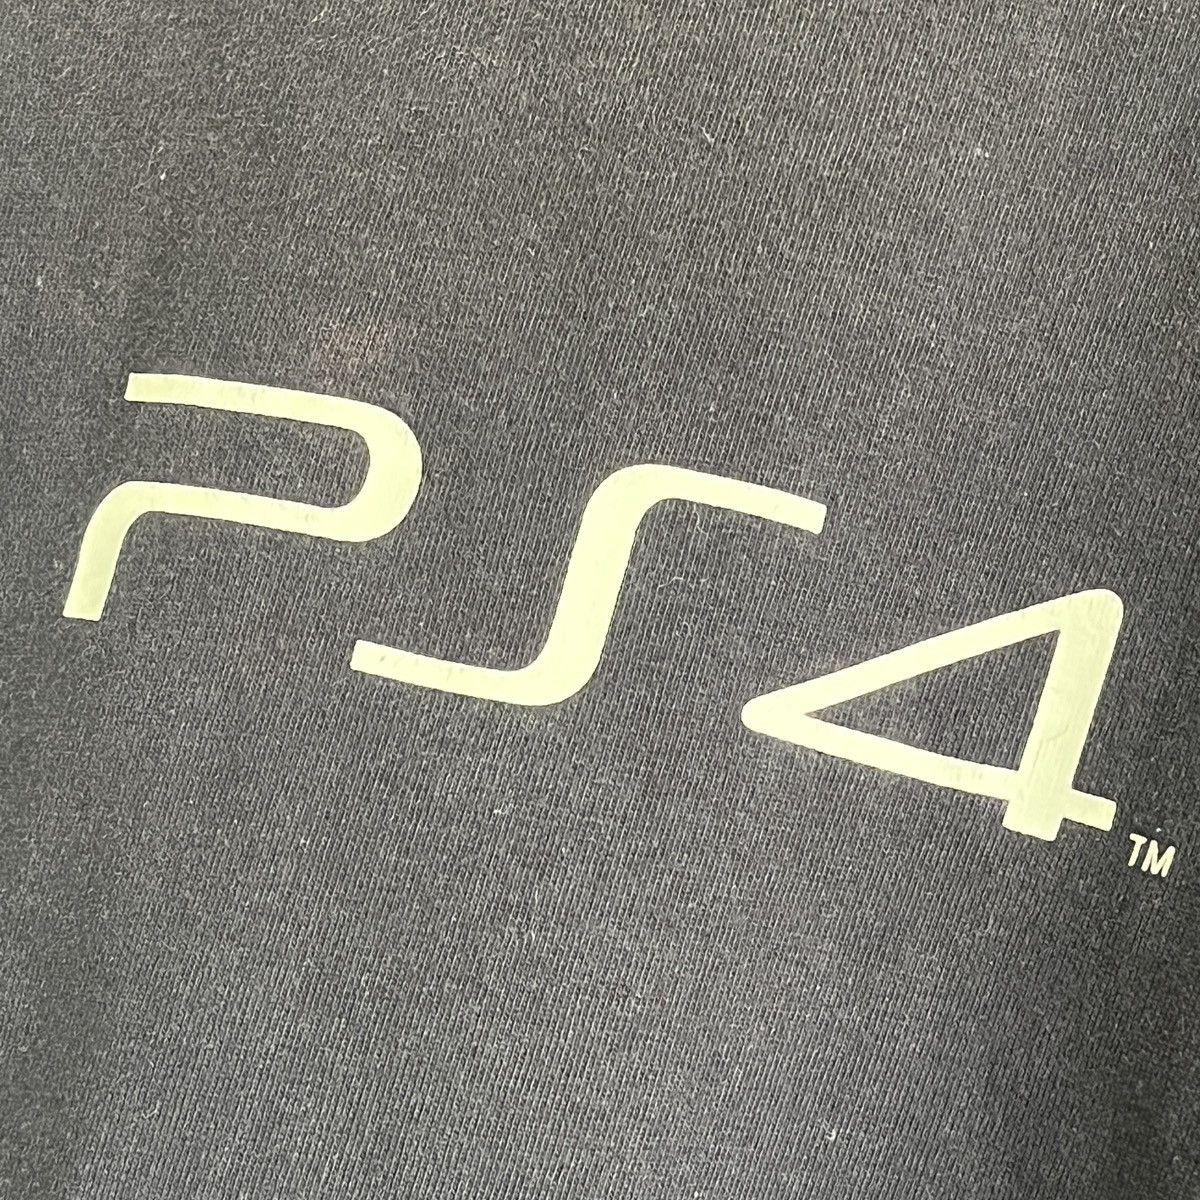 Playstation PS4 Promo TShirt Japan Official Licensed Product - 10